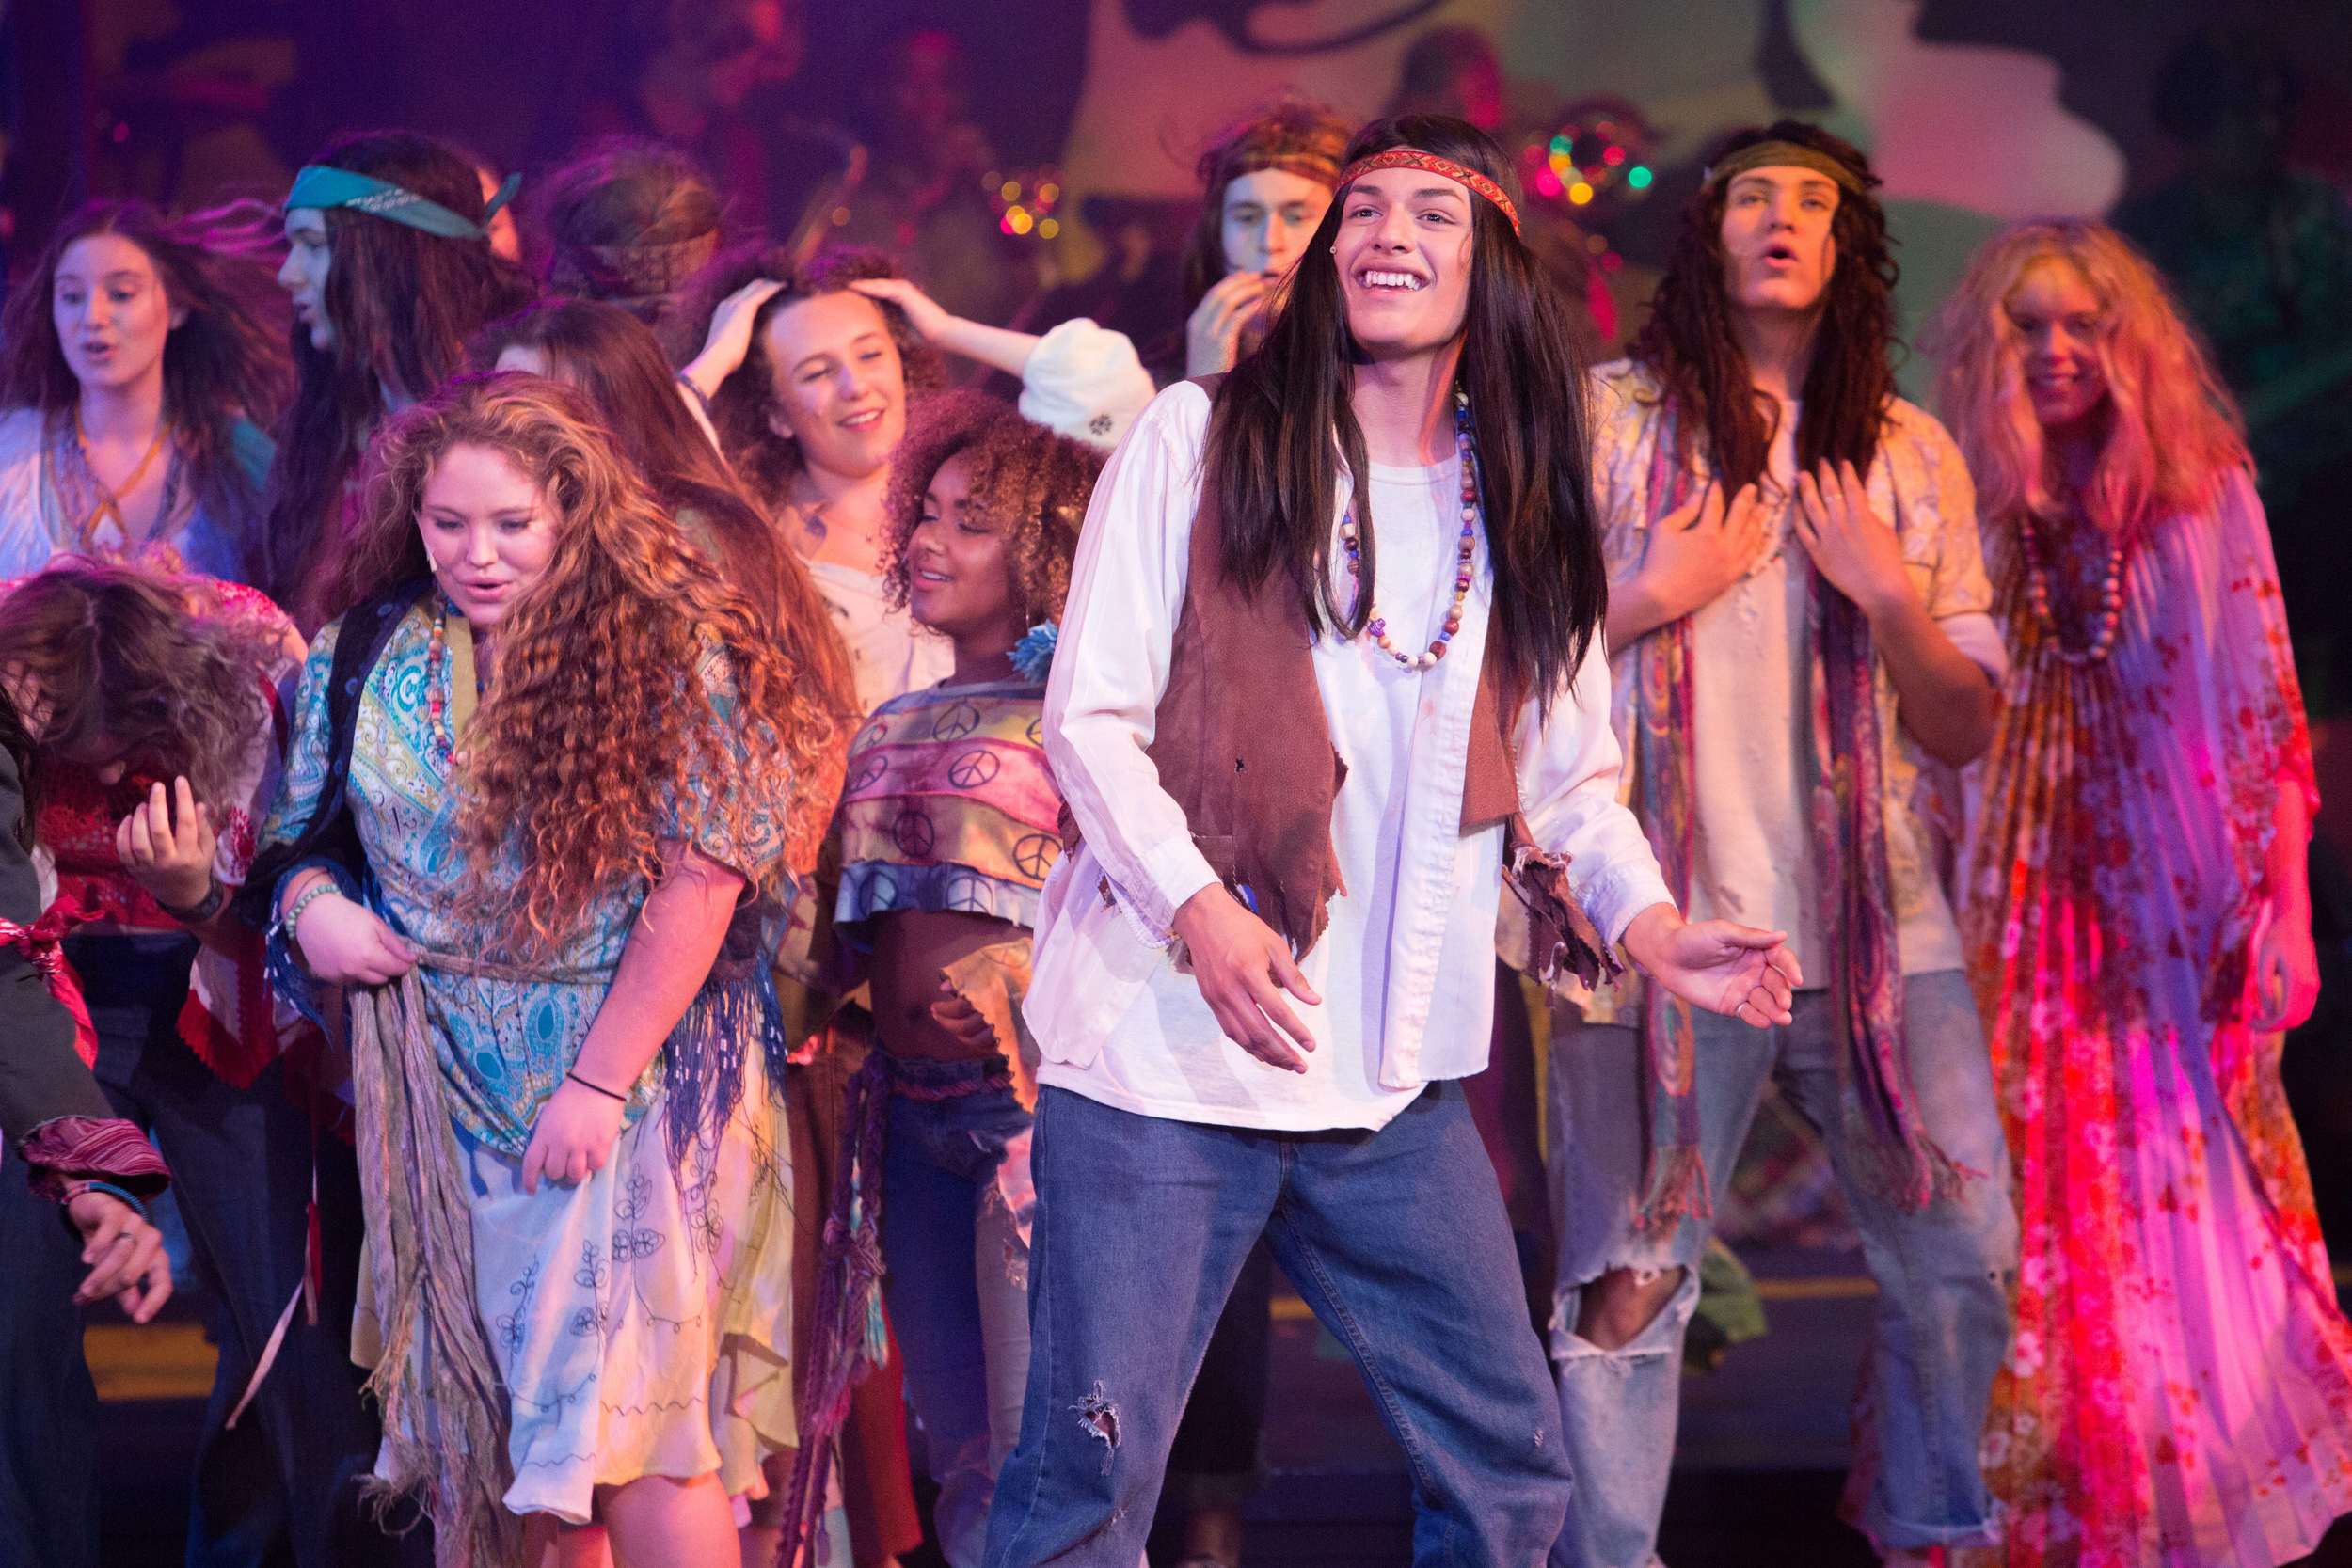  Hair the musical at Santa Barbara High School Theatre. Dircted by Otto Layman, Chrorgaphy by Jenna Tico, Musical Direction by Jon Nathan, Vocal Direction by Sio Tepper,  Costume Design by Bonnie Thor, Light Design by Mike Madden, Set Design by Otto 